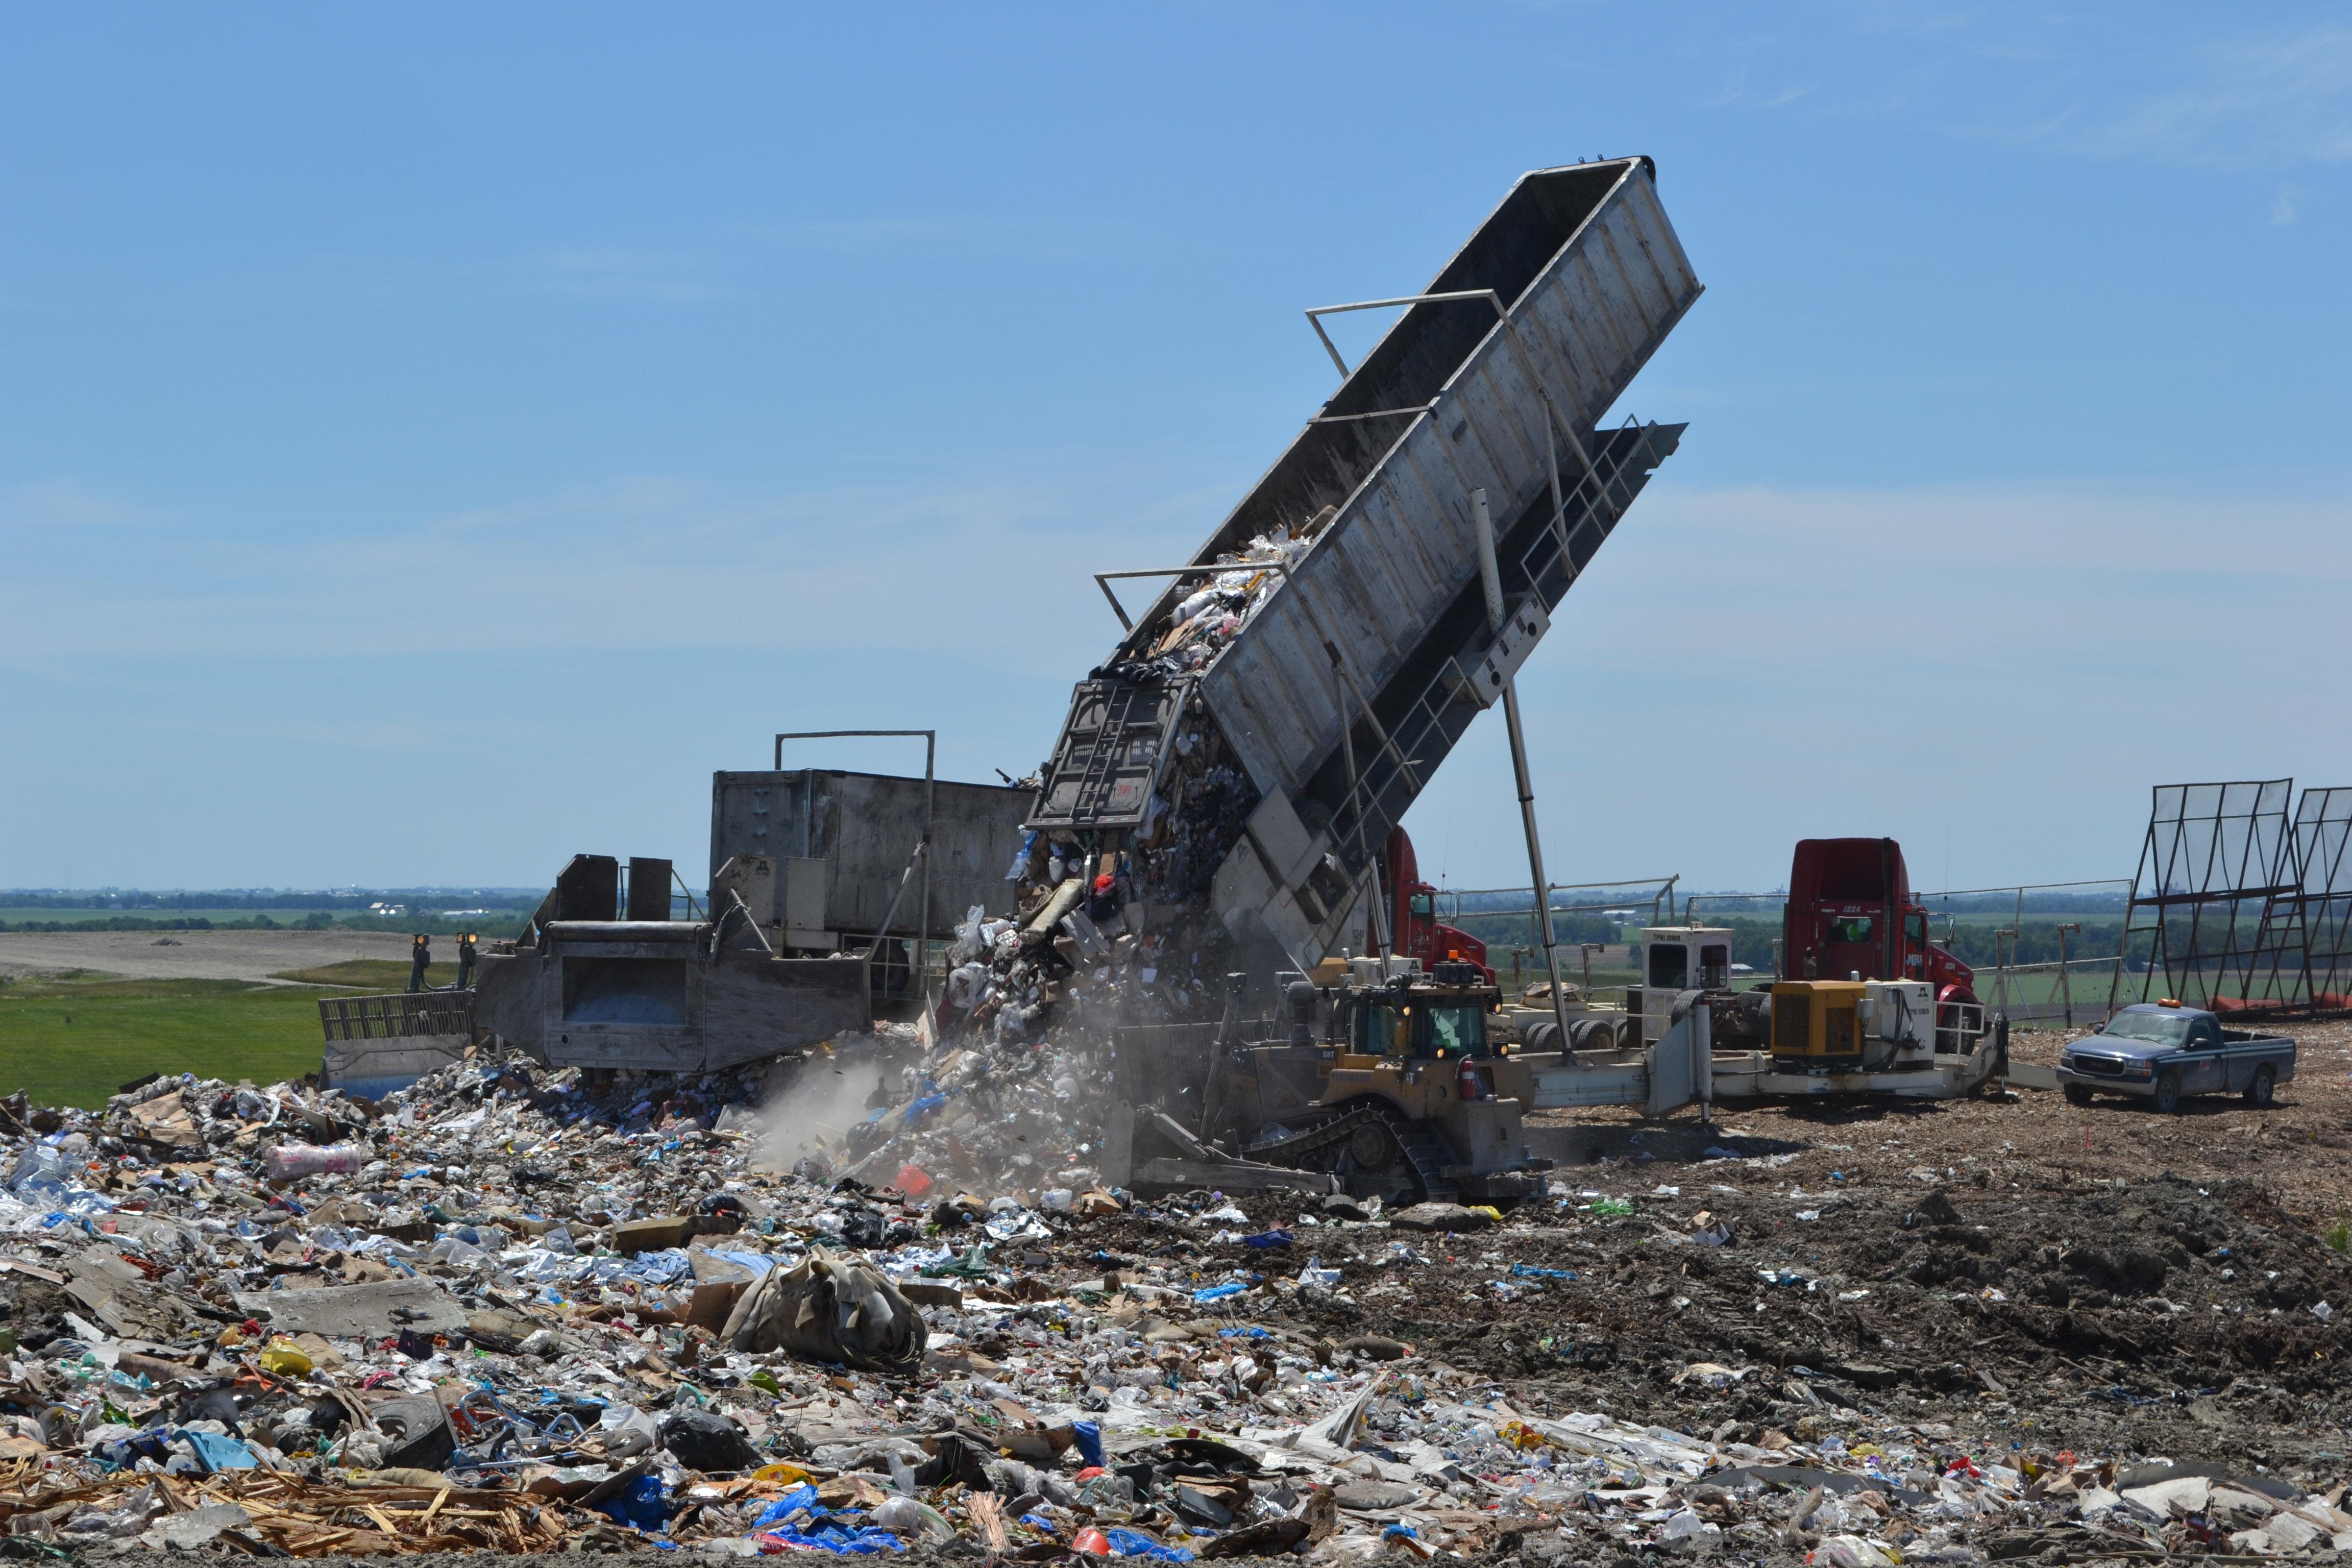 Bill Janes can tell you with surprising accuracy where your trash was dumped at his landfill.